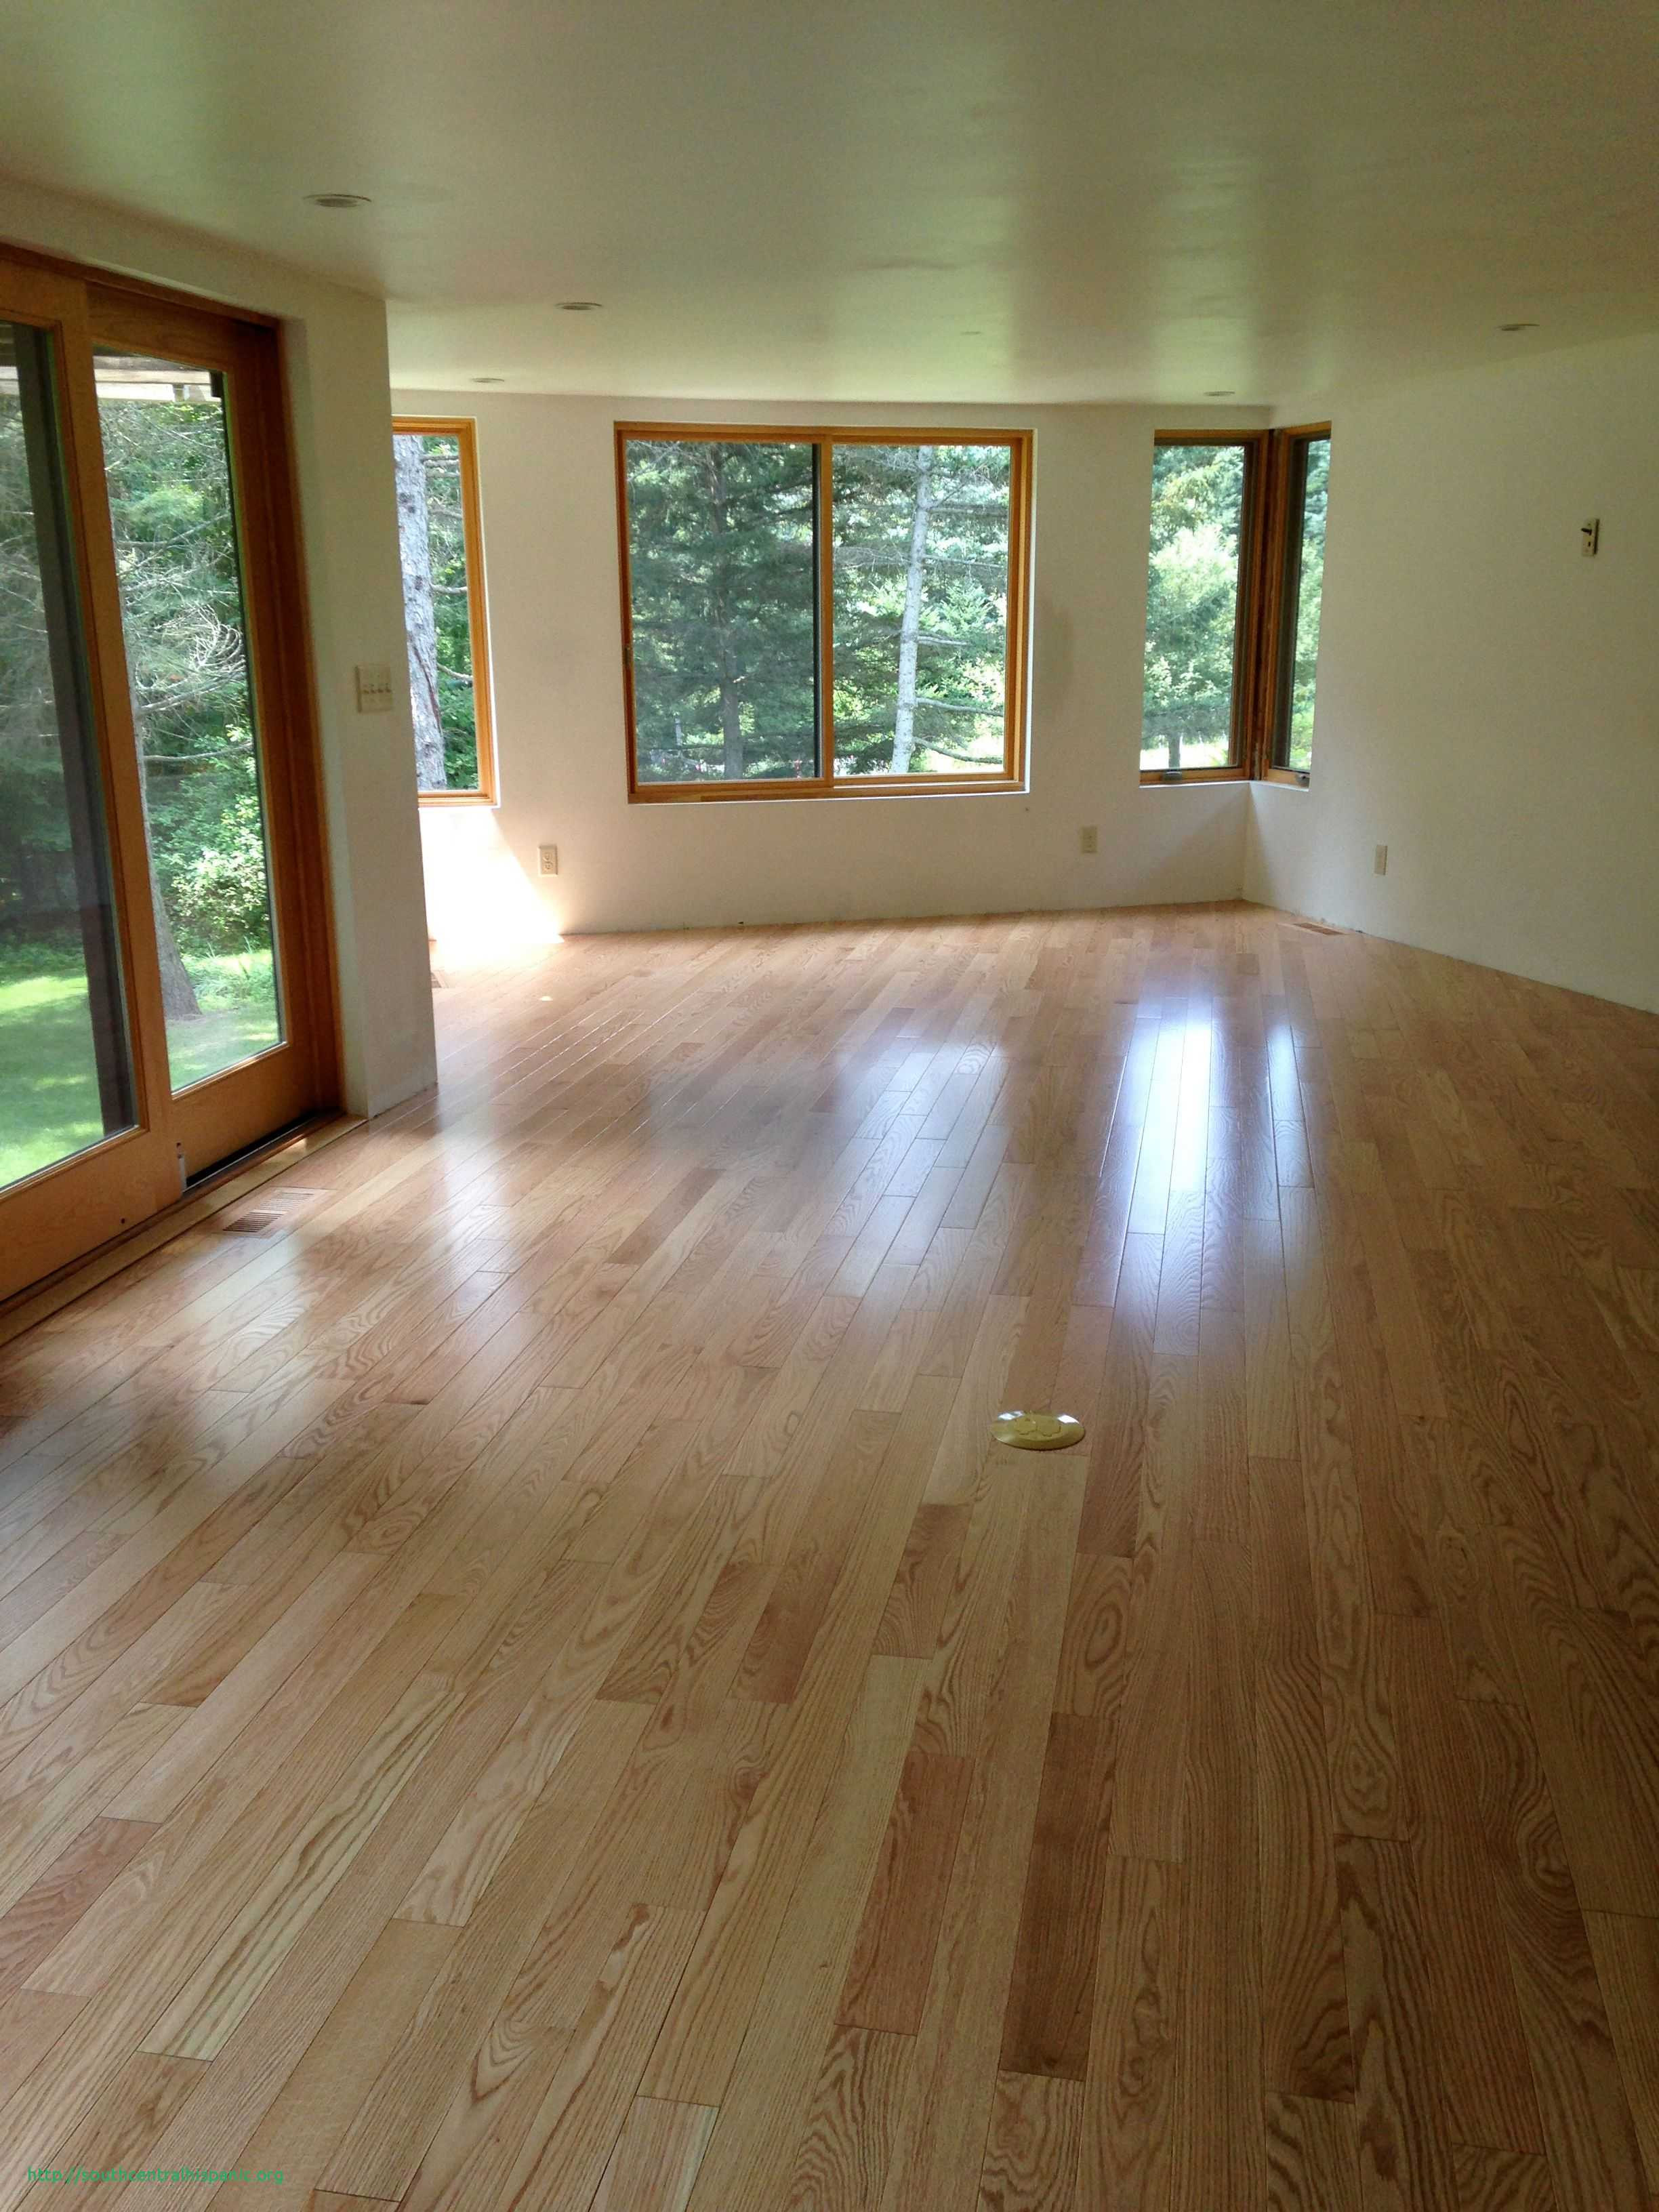 18 Awesome Hardwood Floor Refinishing Process 2024 free download hardwood floor refinishing process of 21 meilleur de restoring hardwood floors without sanding ideas blog within hardwood floor refinishing is an affordable way to spruce up your space witho